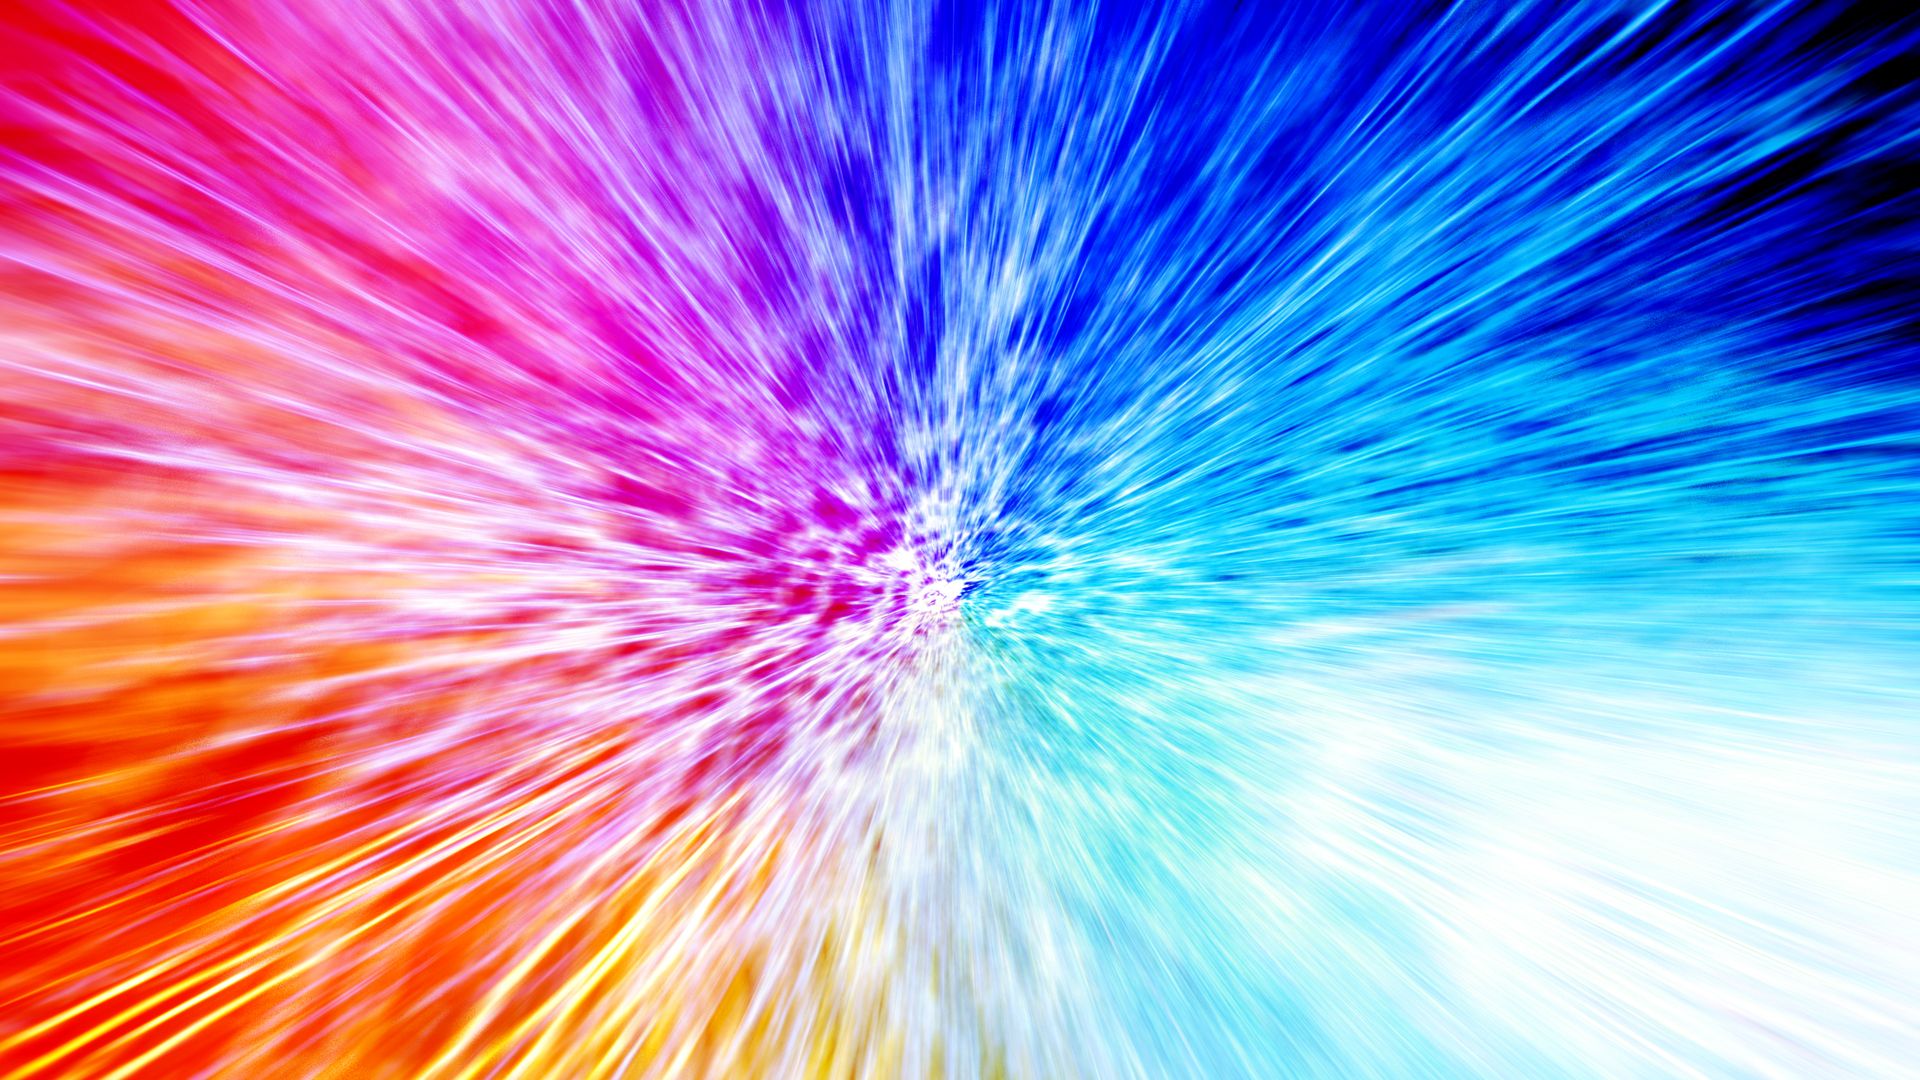 850 Colors HD Wallpapers | Backgrounds - Wallpaper Abyss